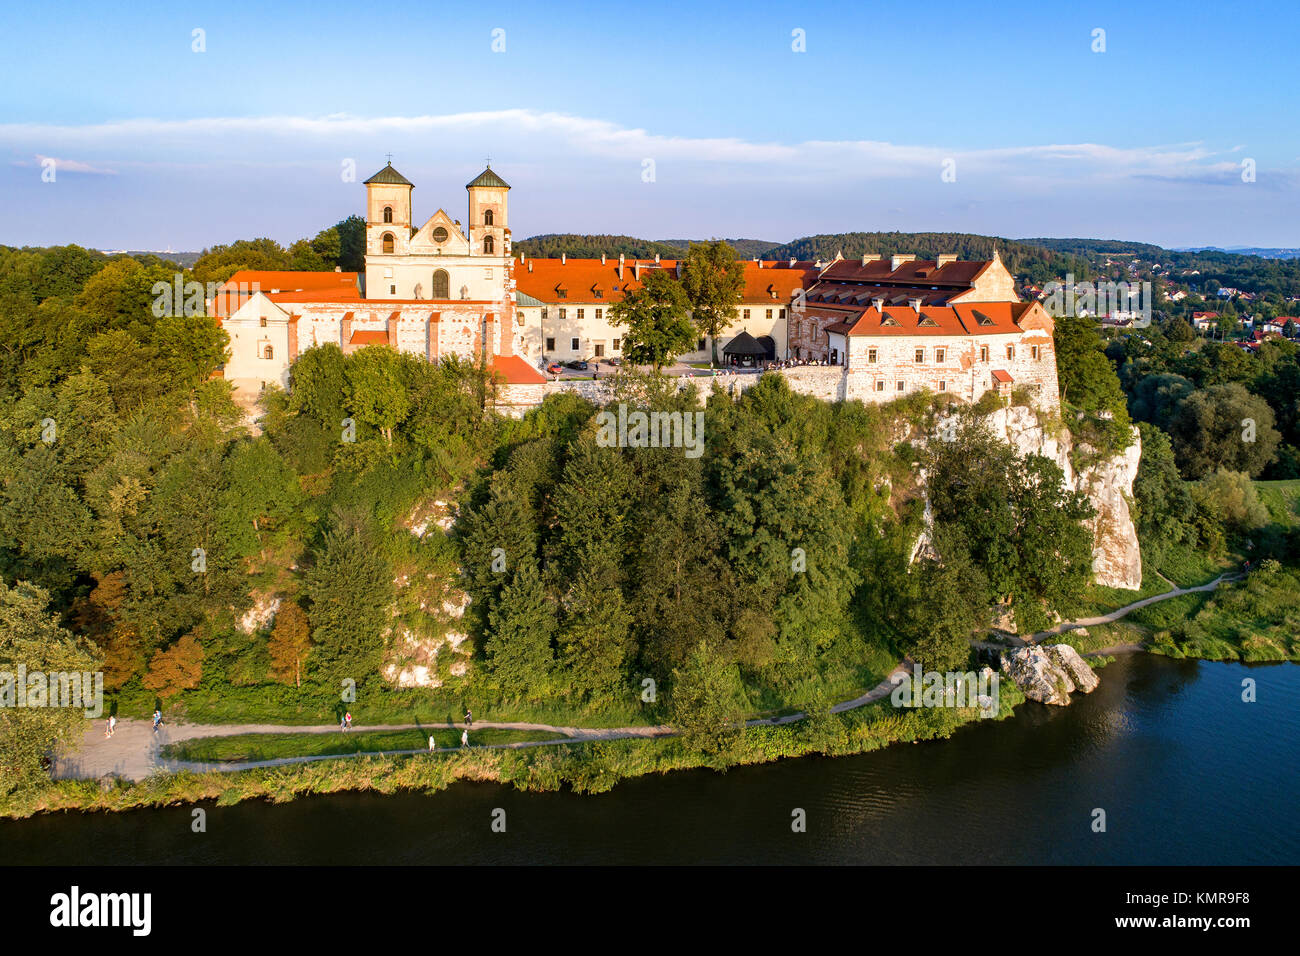 Benedictine monastery on the rocky hill in Tyniec near Cracow, Poland, and Vistula River. Aerial view at sunset Stock Photo